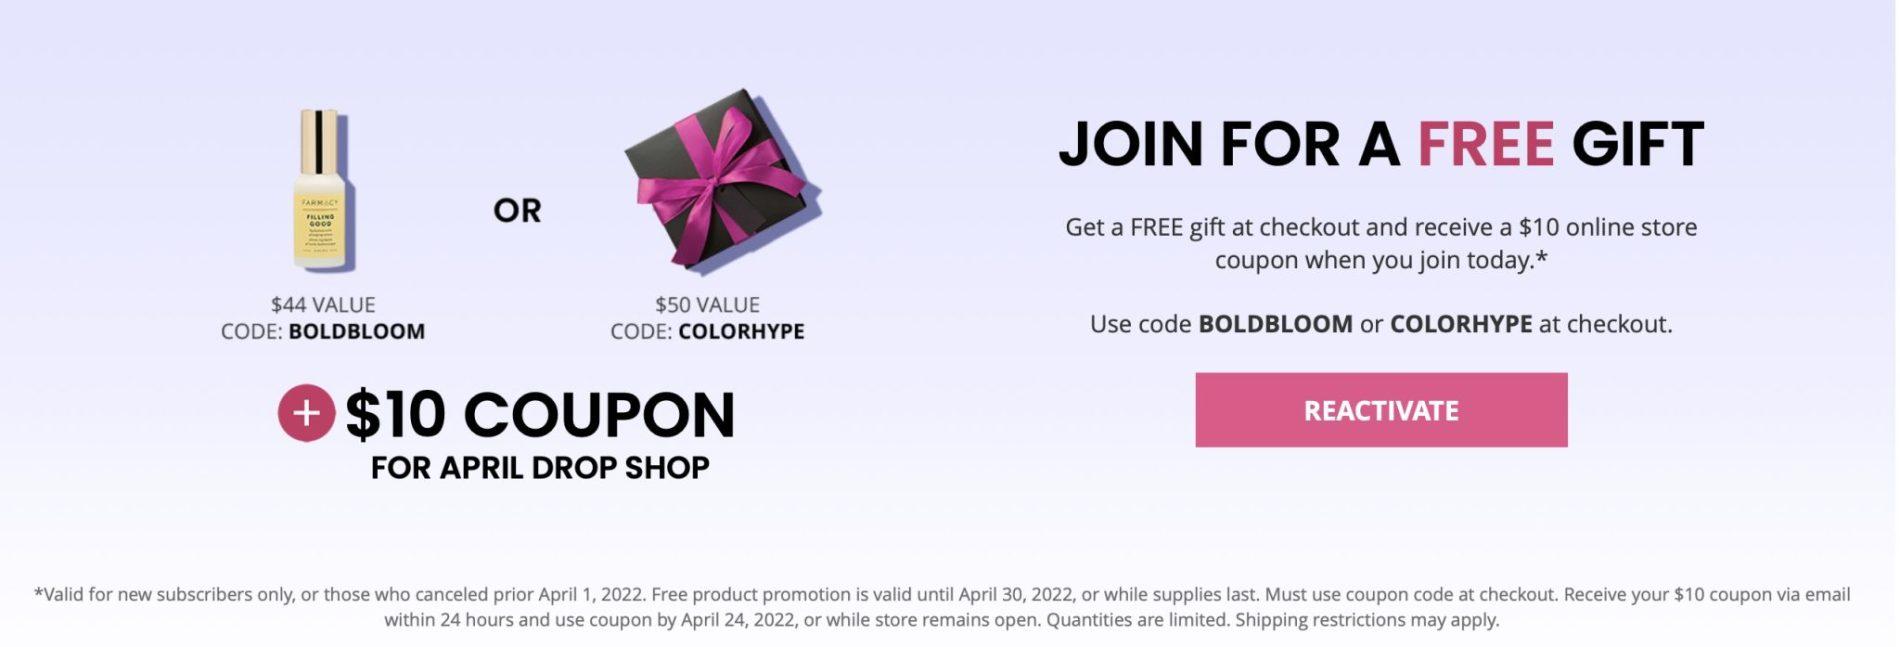 BOXYCHARM April 2022 Coupon Code – Free Gift with Purchase + $10 Pop-Up Credit!